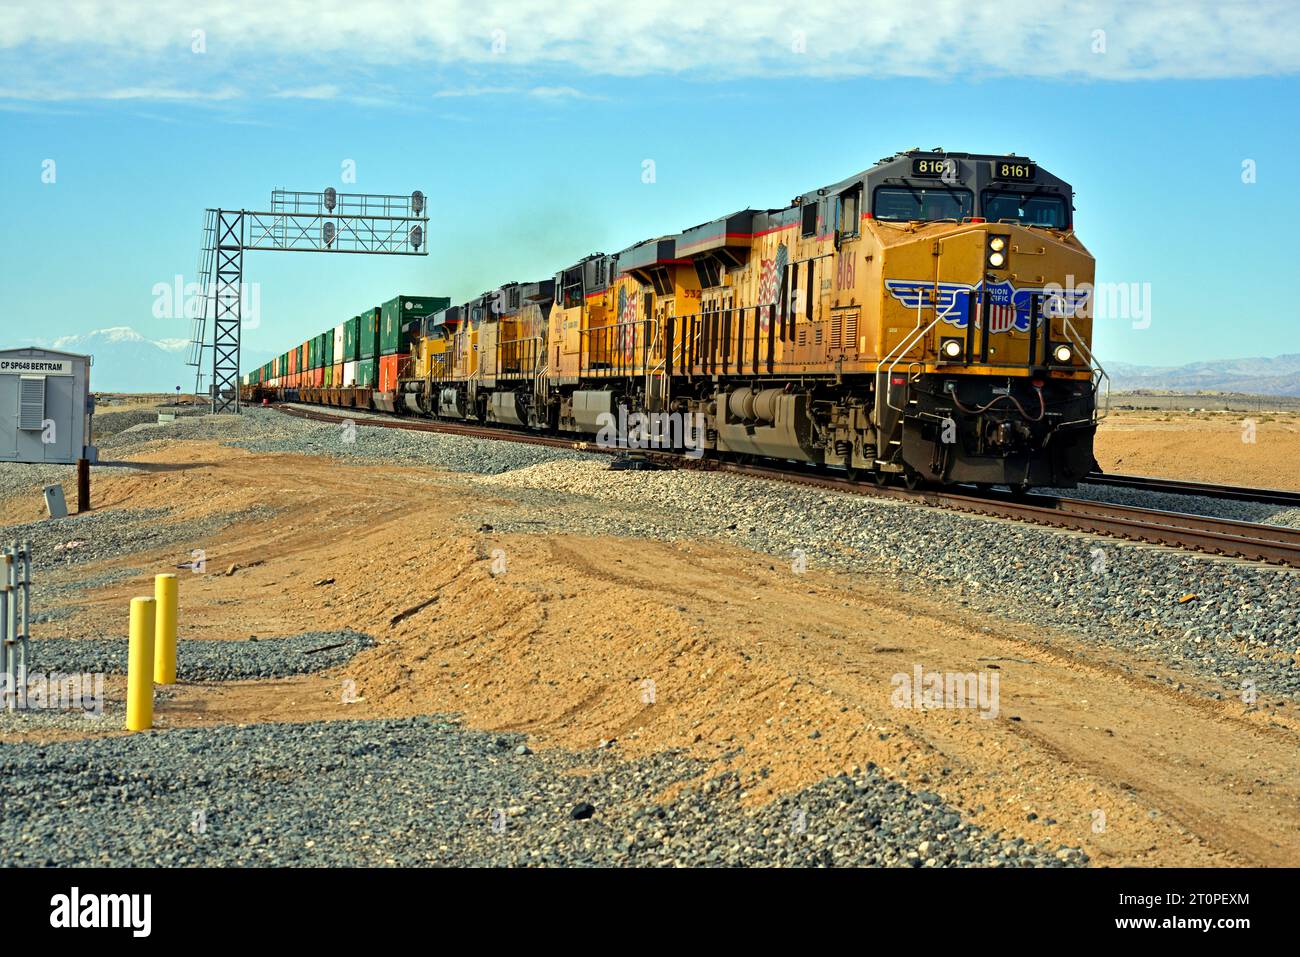 A Union Pacific double stack intermodal freight train is seen passing Bertram Sidings  east bound on the Sunset Route near the shore of the Salton Sea. Stock Photo